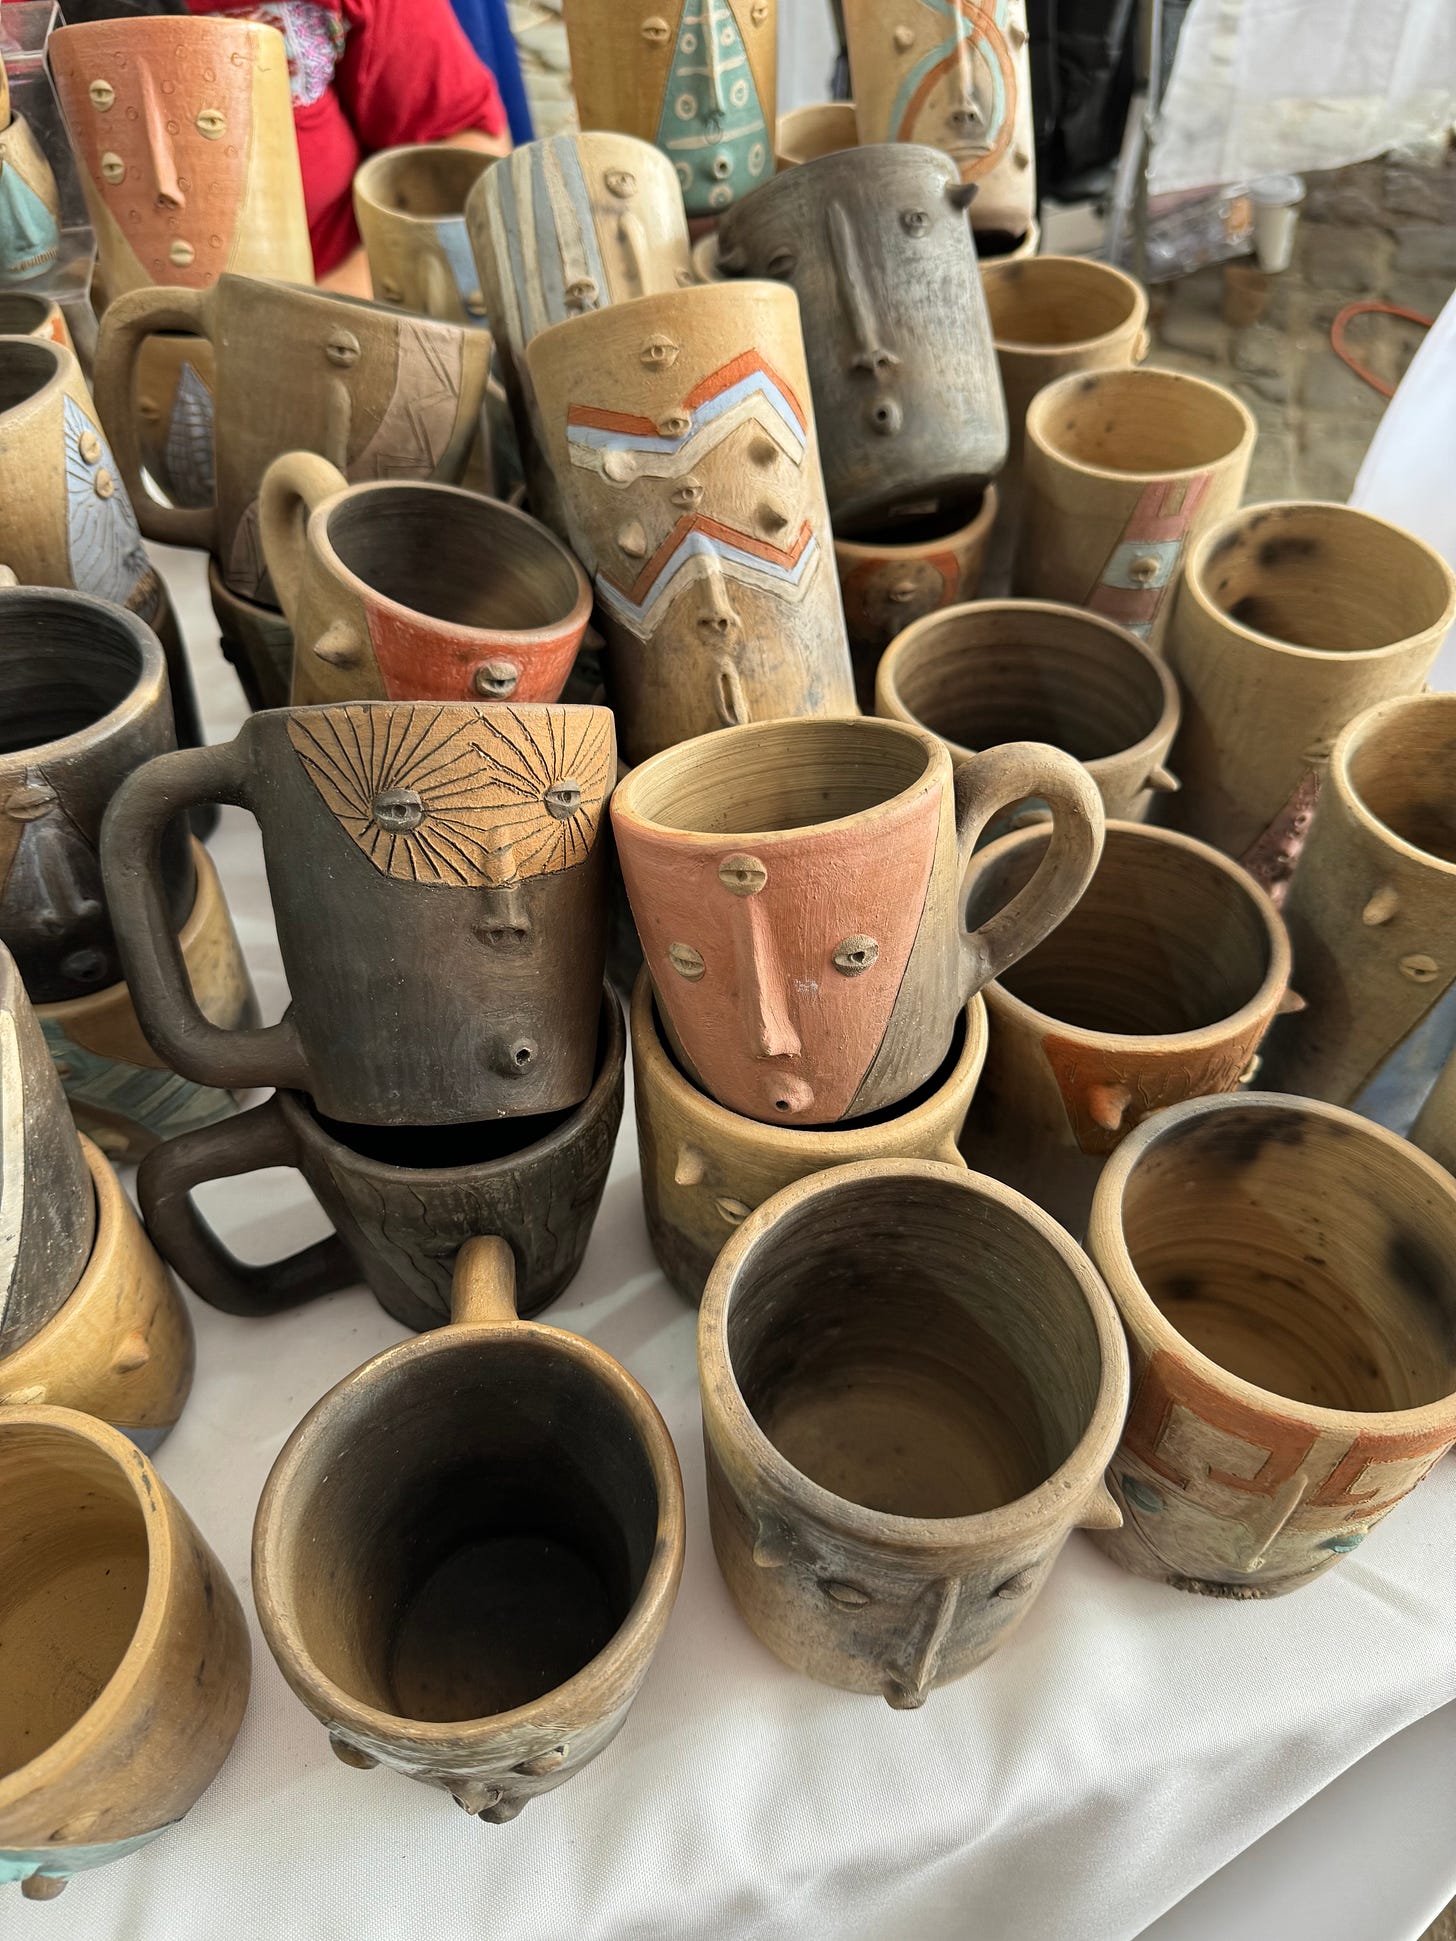 A number of mugs and plant pots with designs and faces on them sitting on a table.